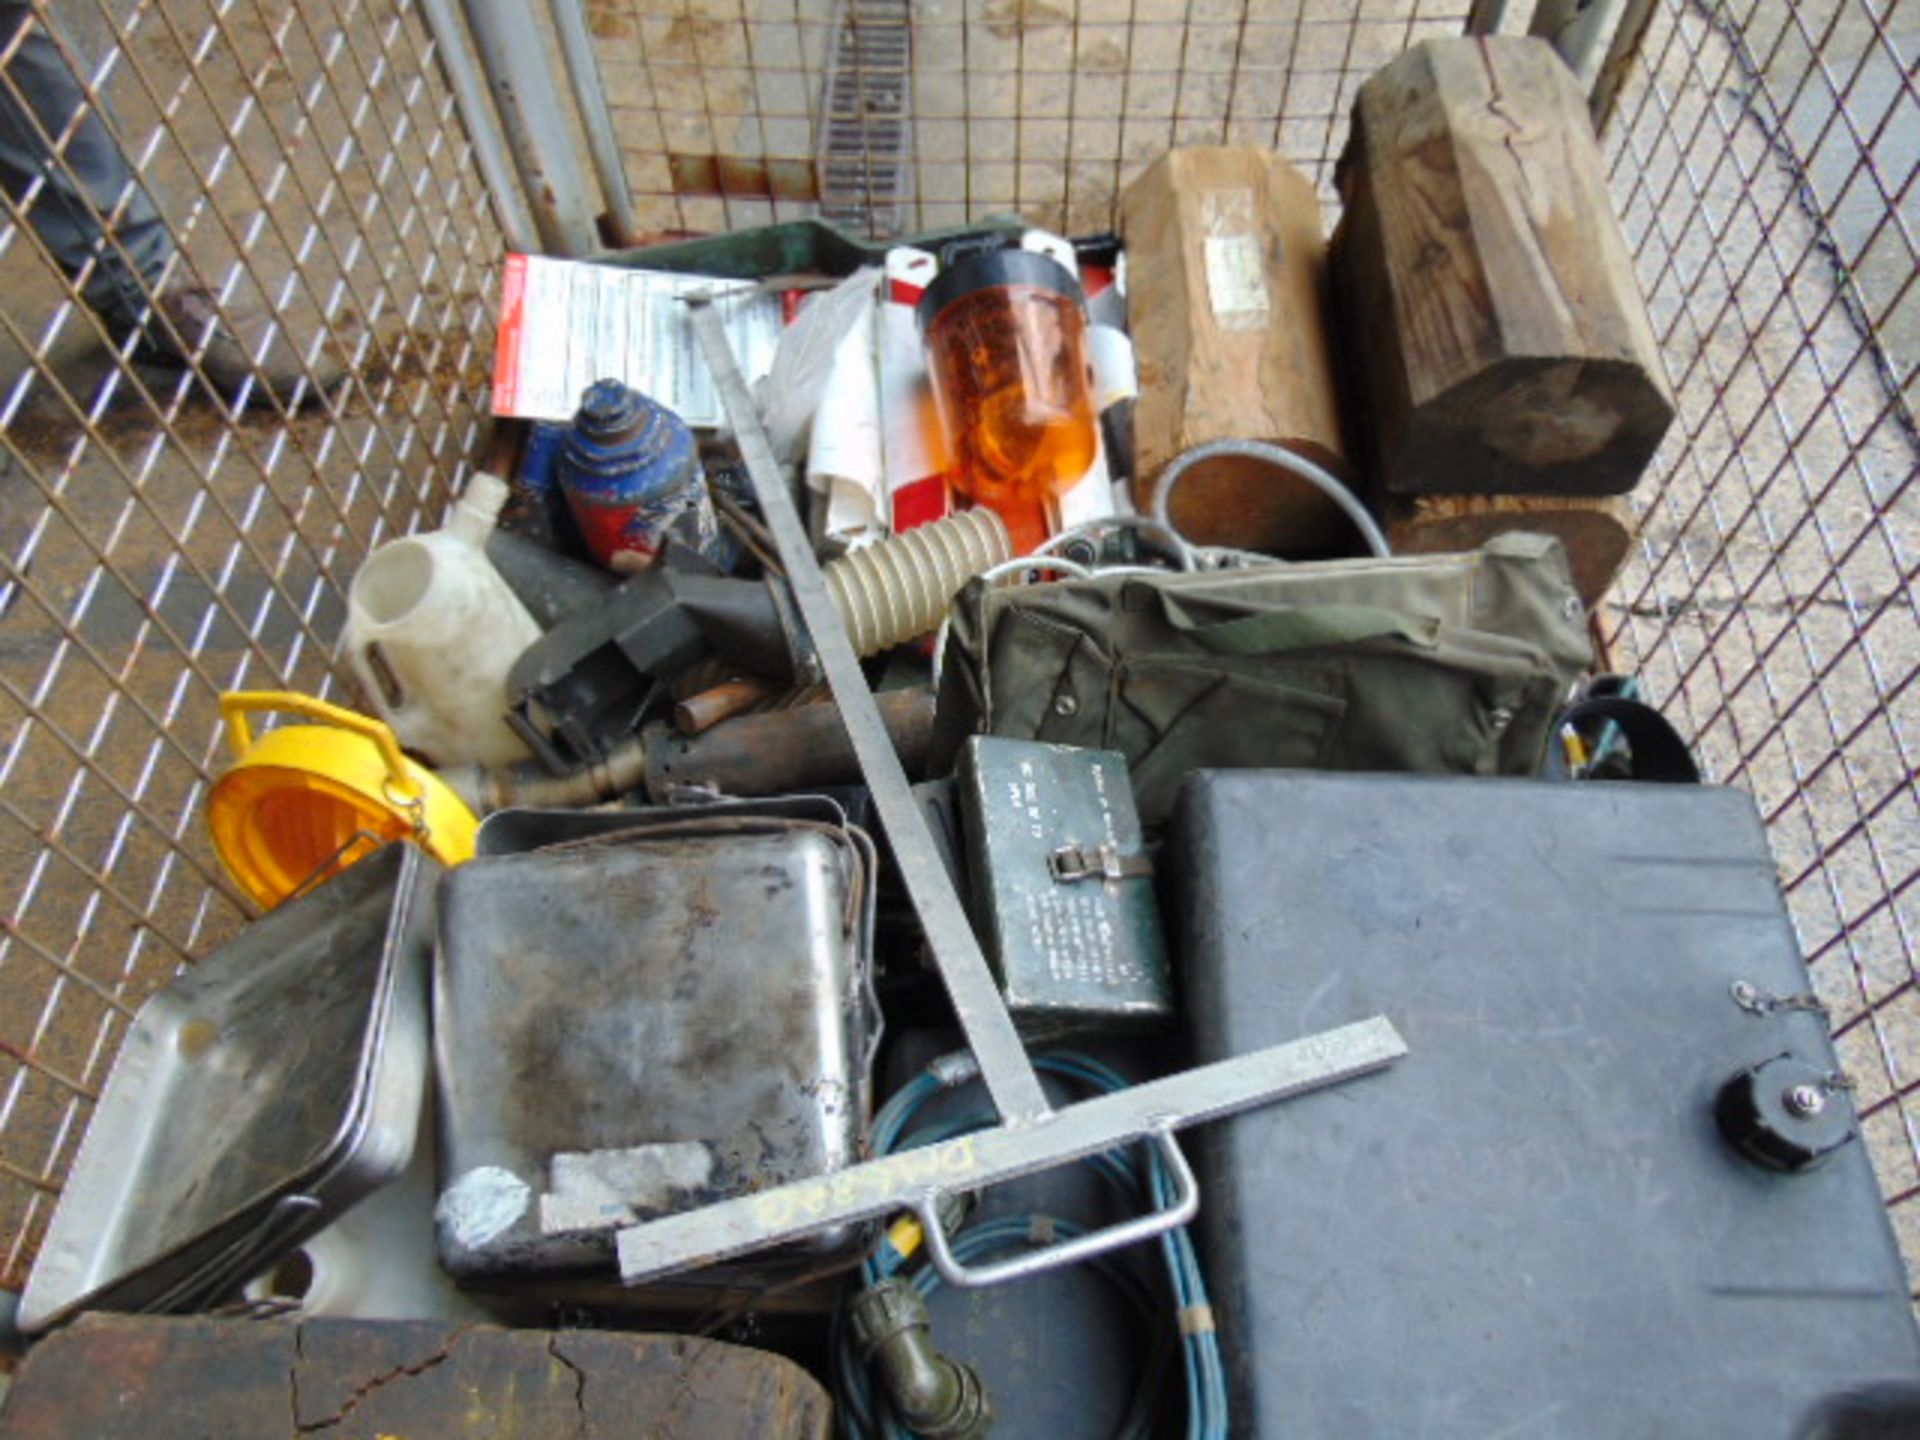 1 x Stillage of Fighting Vehicle Spares inc Cables, Pins, Water Container, Chocks, Beacon etc - Image 2 of 5